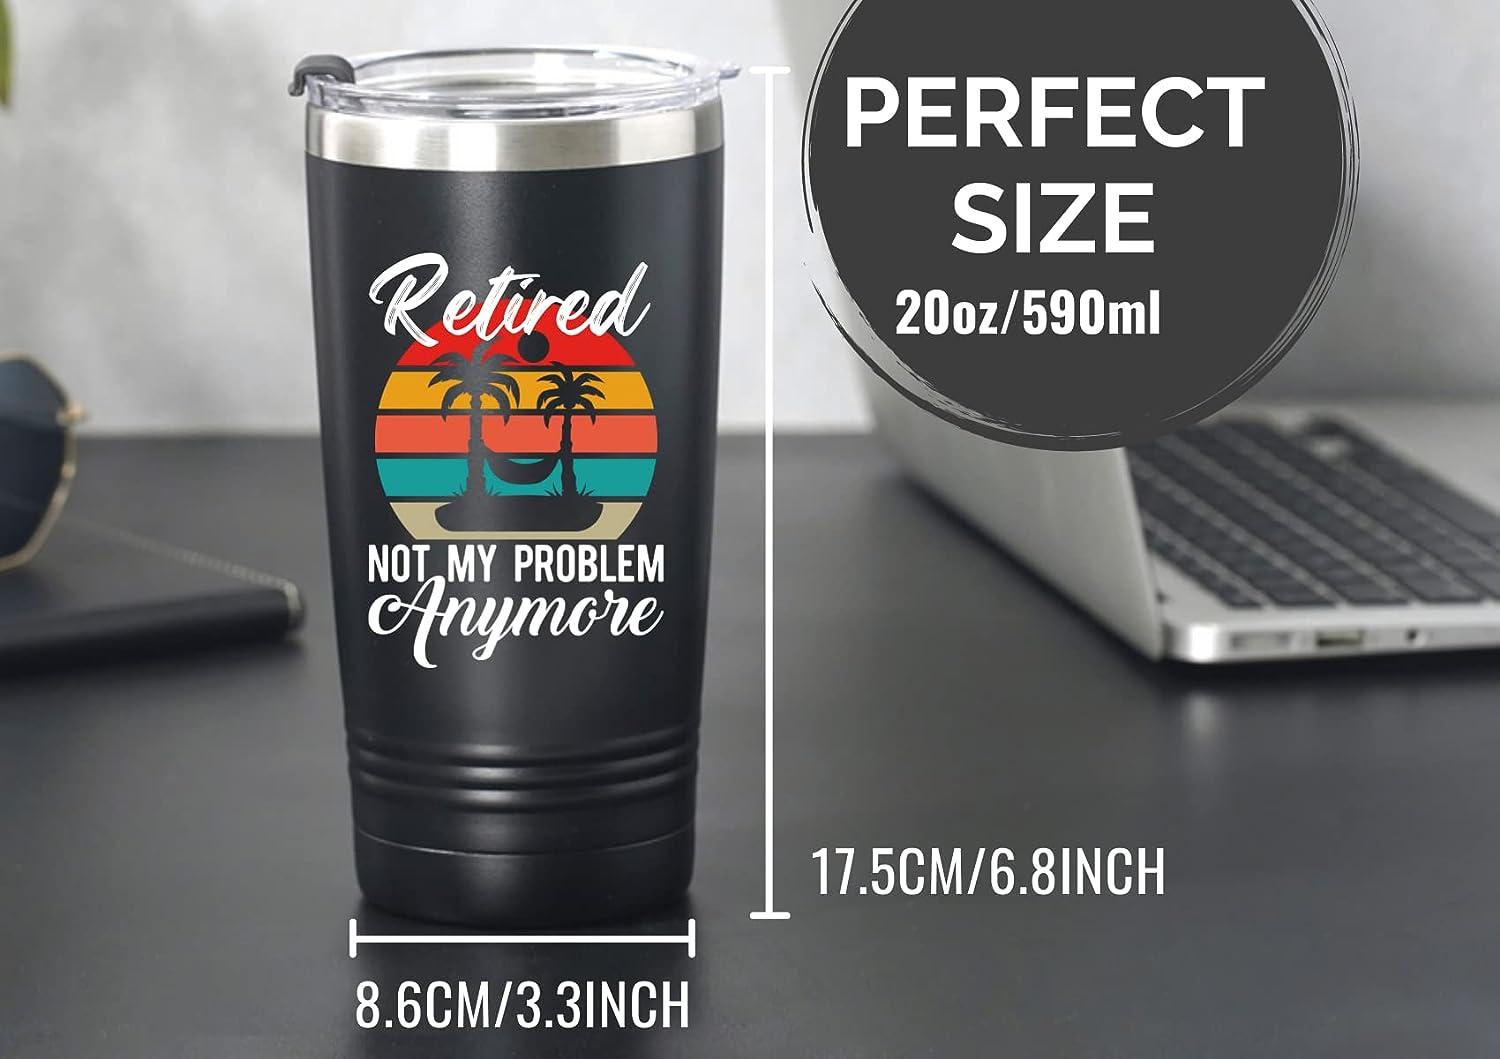 Retirement Gifts for Men and Women, Unique 20oz Tumbler Retirement Present,  Retired Gifts For Grandpa, Grandma, Nurse, Police, Boss, Coworker - Retired  Not My Problem Anymore Black - Retired Not My Problem Anymore